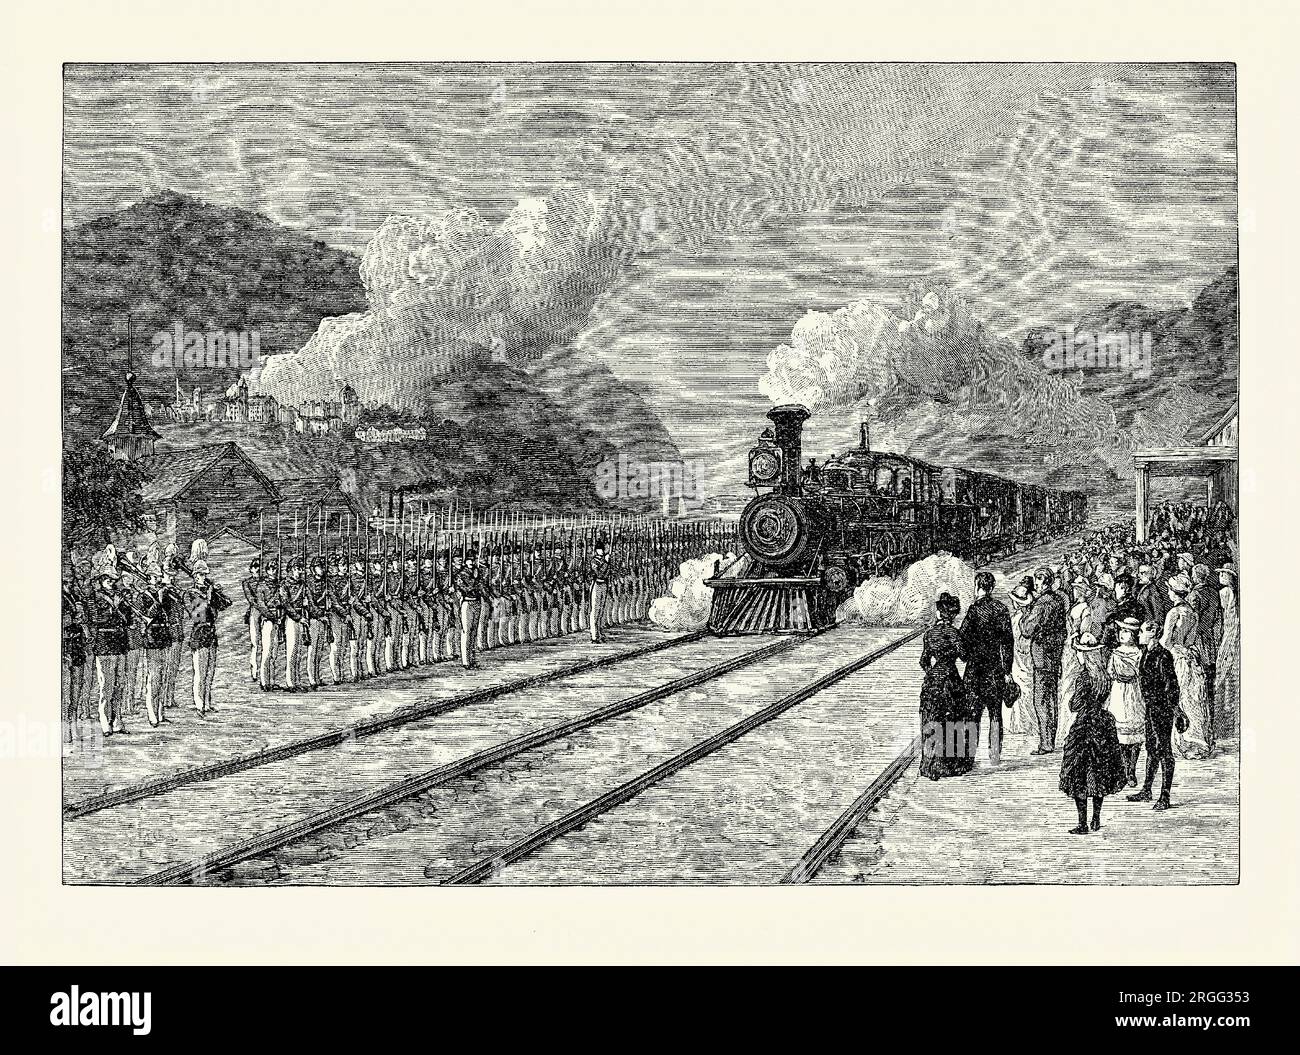 An old engraving, from an American history book of 1895, of the funeral train bearing the body of Ulysses S Grant at West Point, New York, USA on 5 August 1885. The train was travelling from Mount McGregor to New York City. Held on August 8 1885 in New York City, Grant’s funeral procession was the largest public gathering in the country up until that time. Ulysses S Grant (1822–1885) was an American military officer and politician who served as the 18th president of the USA from 1869 to 1877. He led the Union Army to victory in the American Civil War in 1865. Stock Photo